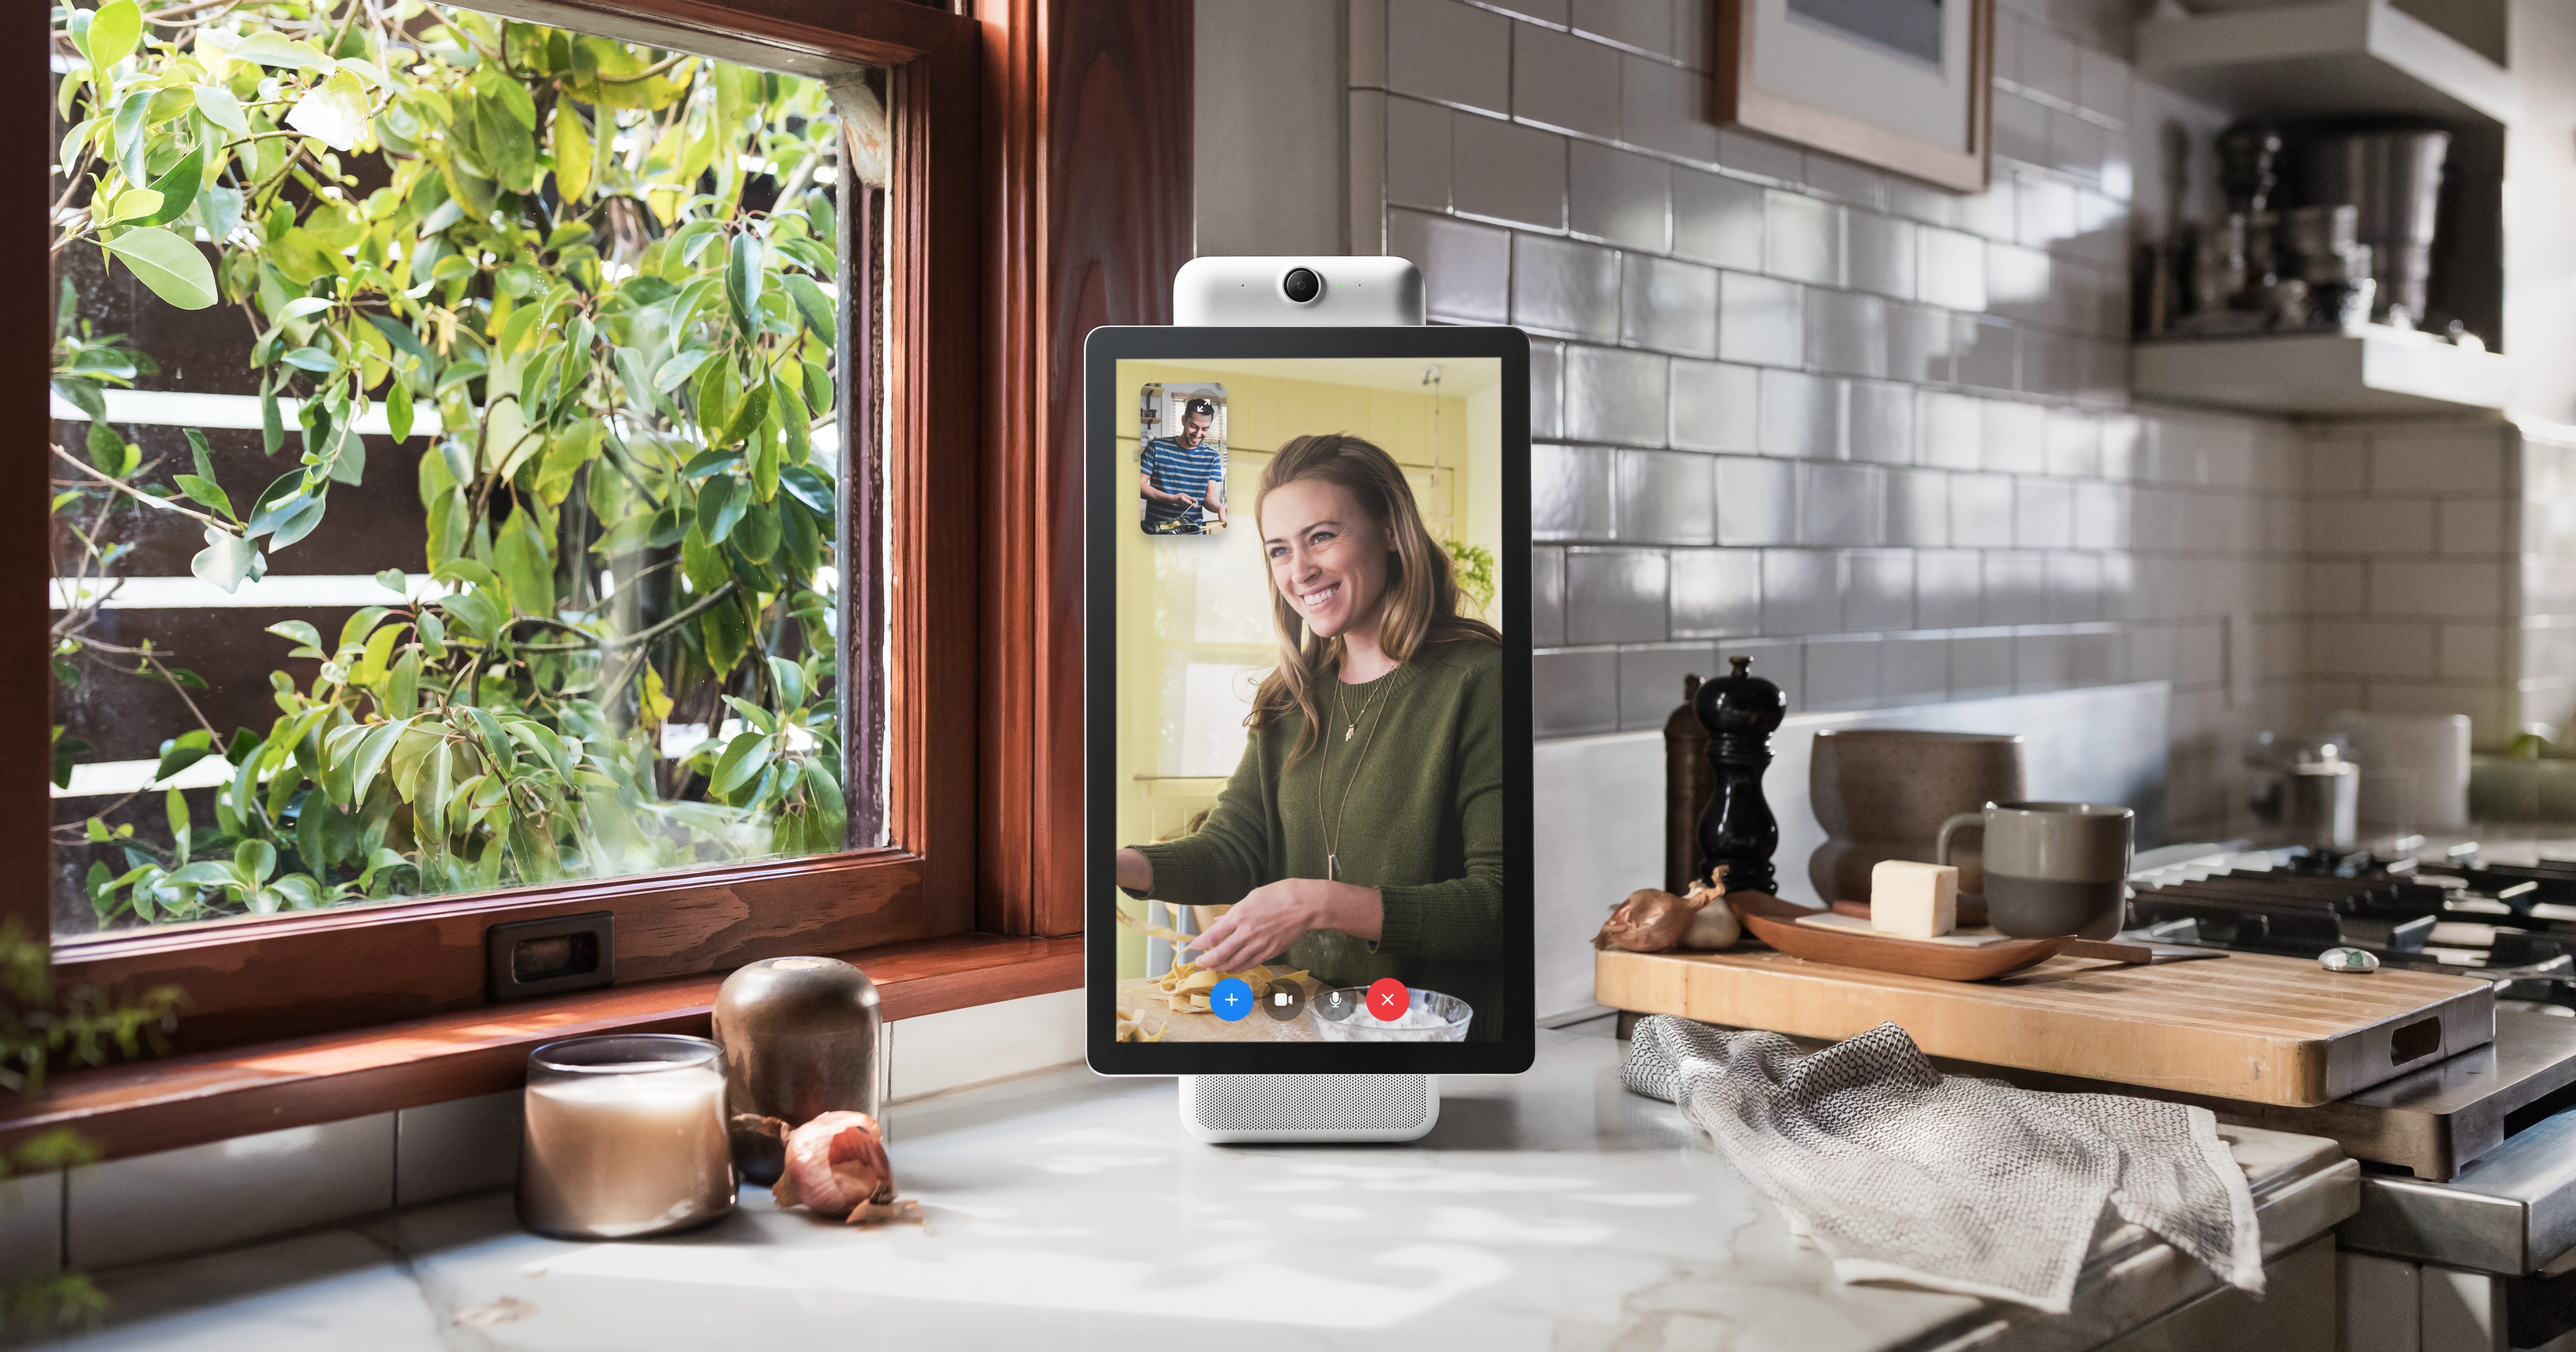 This image provided by Facebook shows the company's product called Portal Plus.